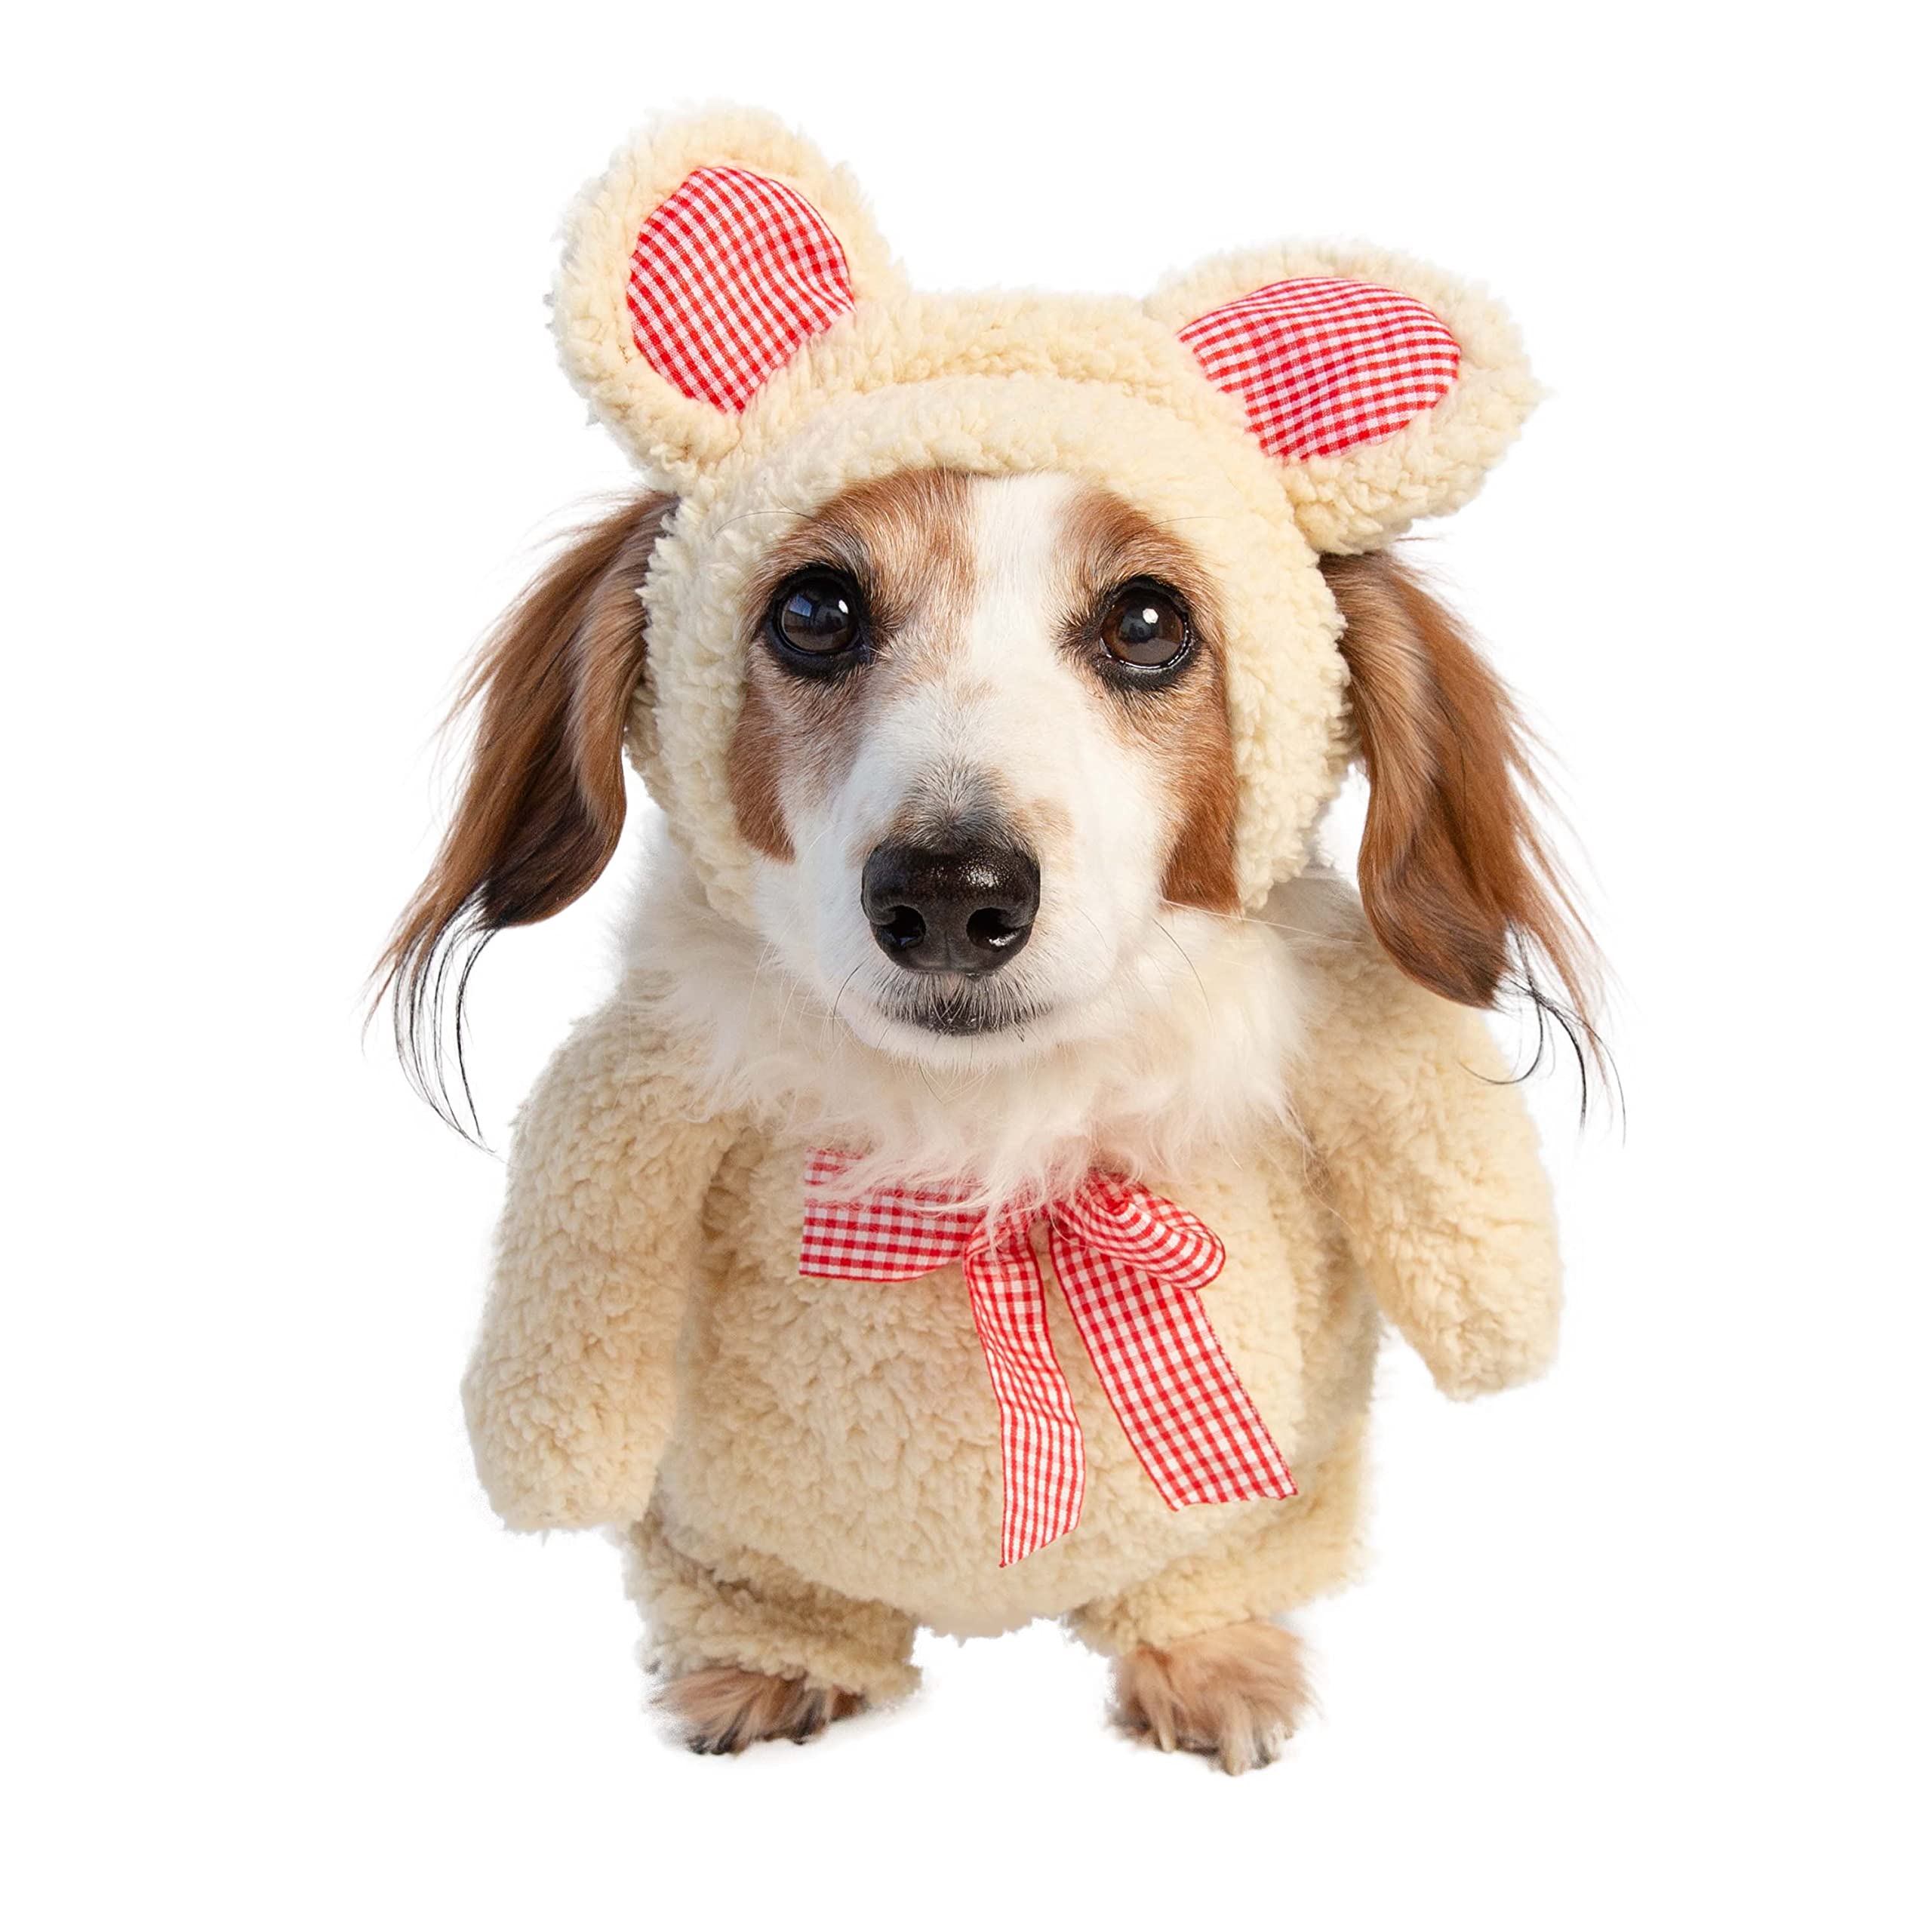 Pet Krewe Walking Teddy Bear Dog Costume - Fits Small, Medium, Large and Extra Large Pets - Perfect for Halloween, Christmas Holiday, Parties, Photoshoots, Gifts for Dog Lovers  - Like New